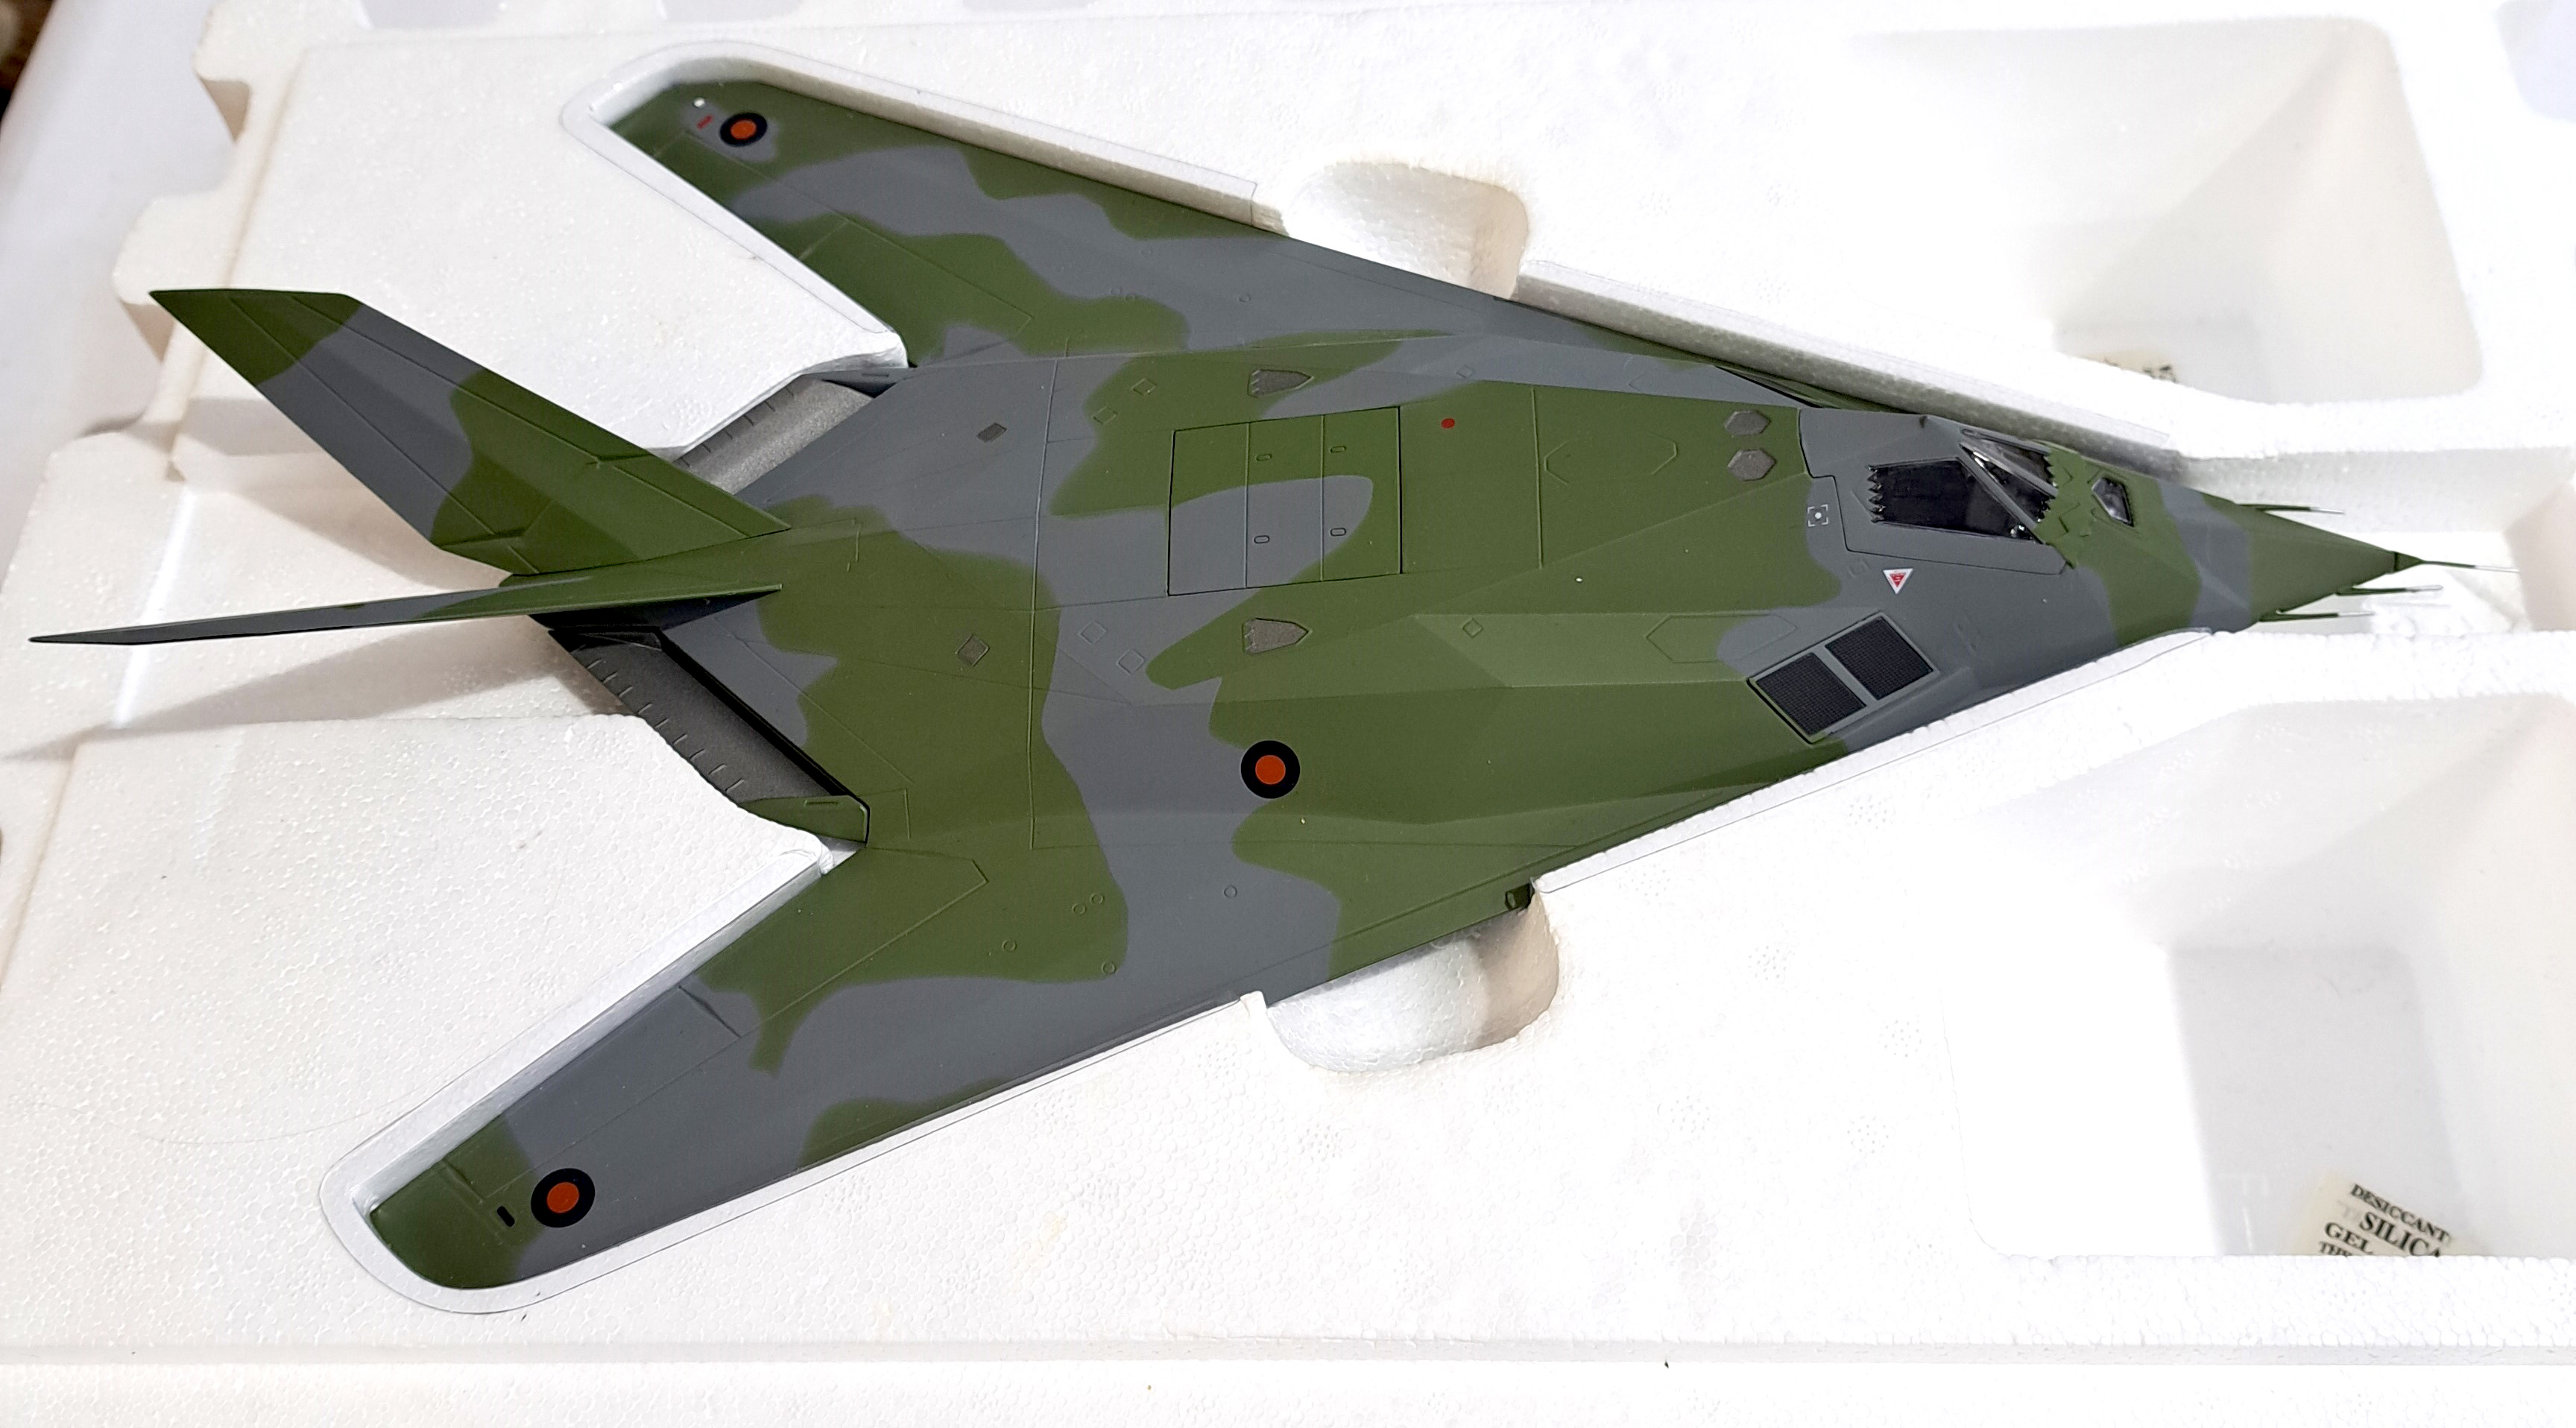 Franklin Mint  "Armour Collection", a boxed pair of 1:48 scaleF117 Stealth Fighter Jets - Image 3 of 4